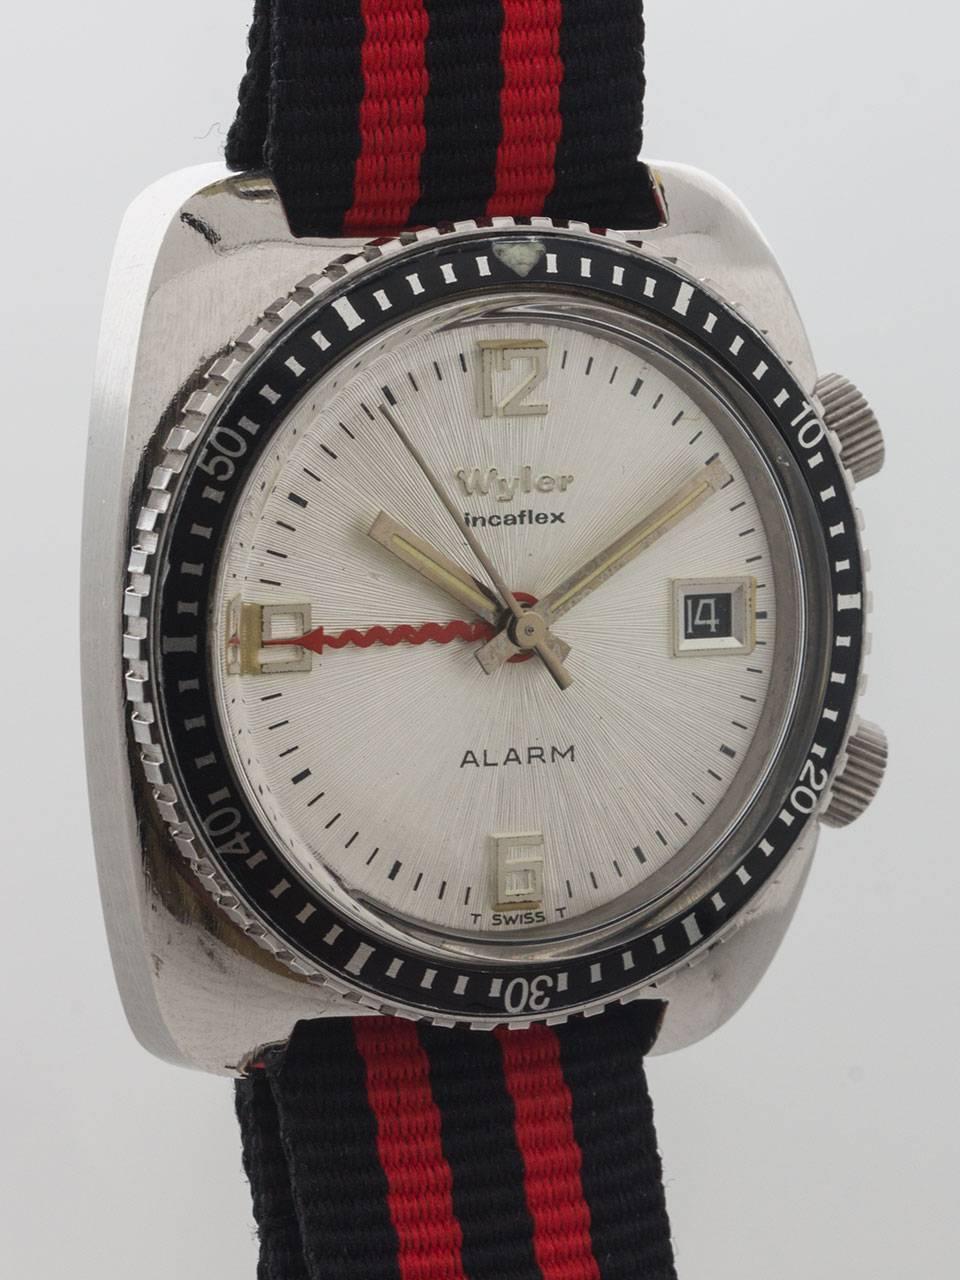 
Wyler stainless steel Alarm, in near new old stock condition with great looking “modern” graphics. Circa 1960’s 36 x 40mm cushion shaped case with screw down back, dual crowns and black elapsed time bezel. Beautiful condition white original dial